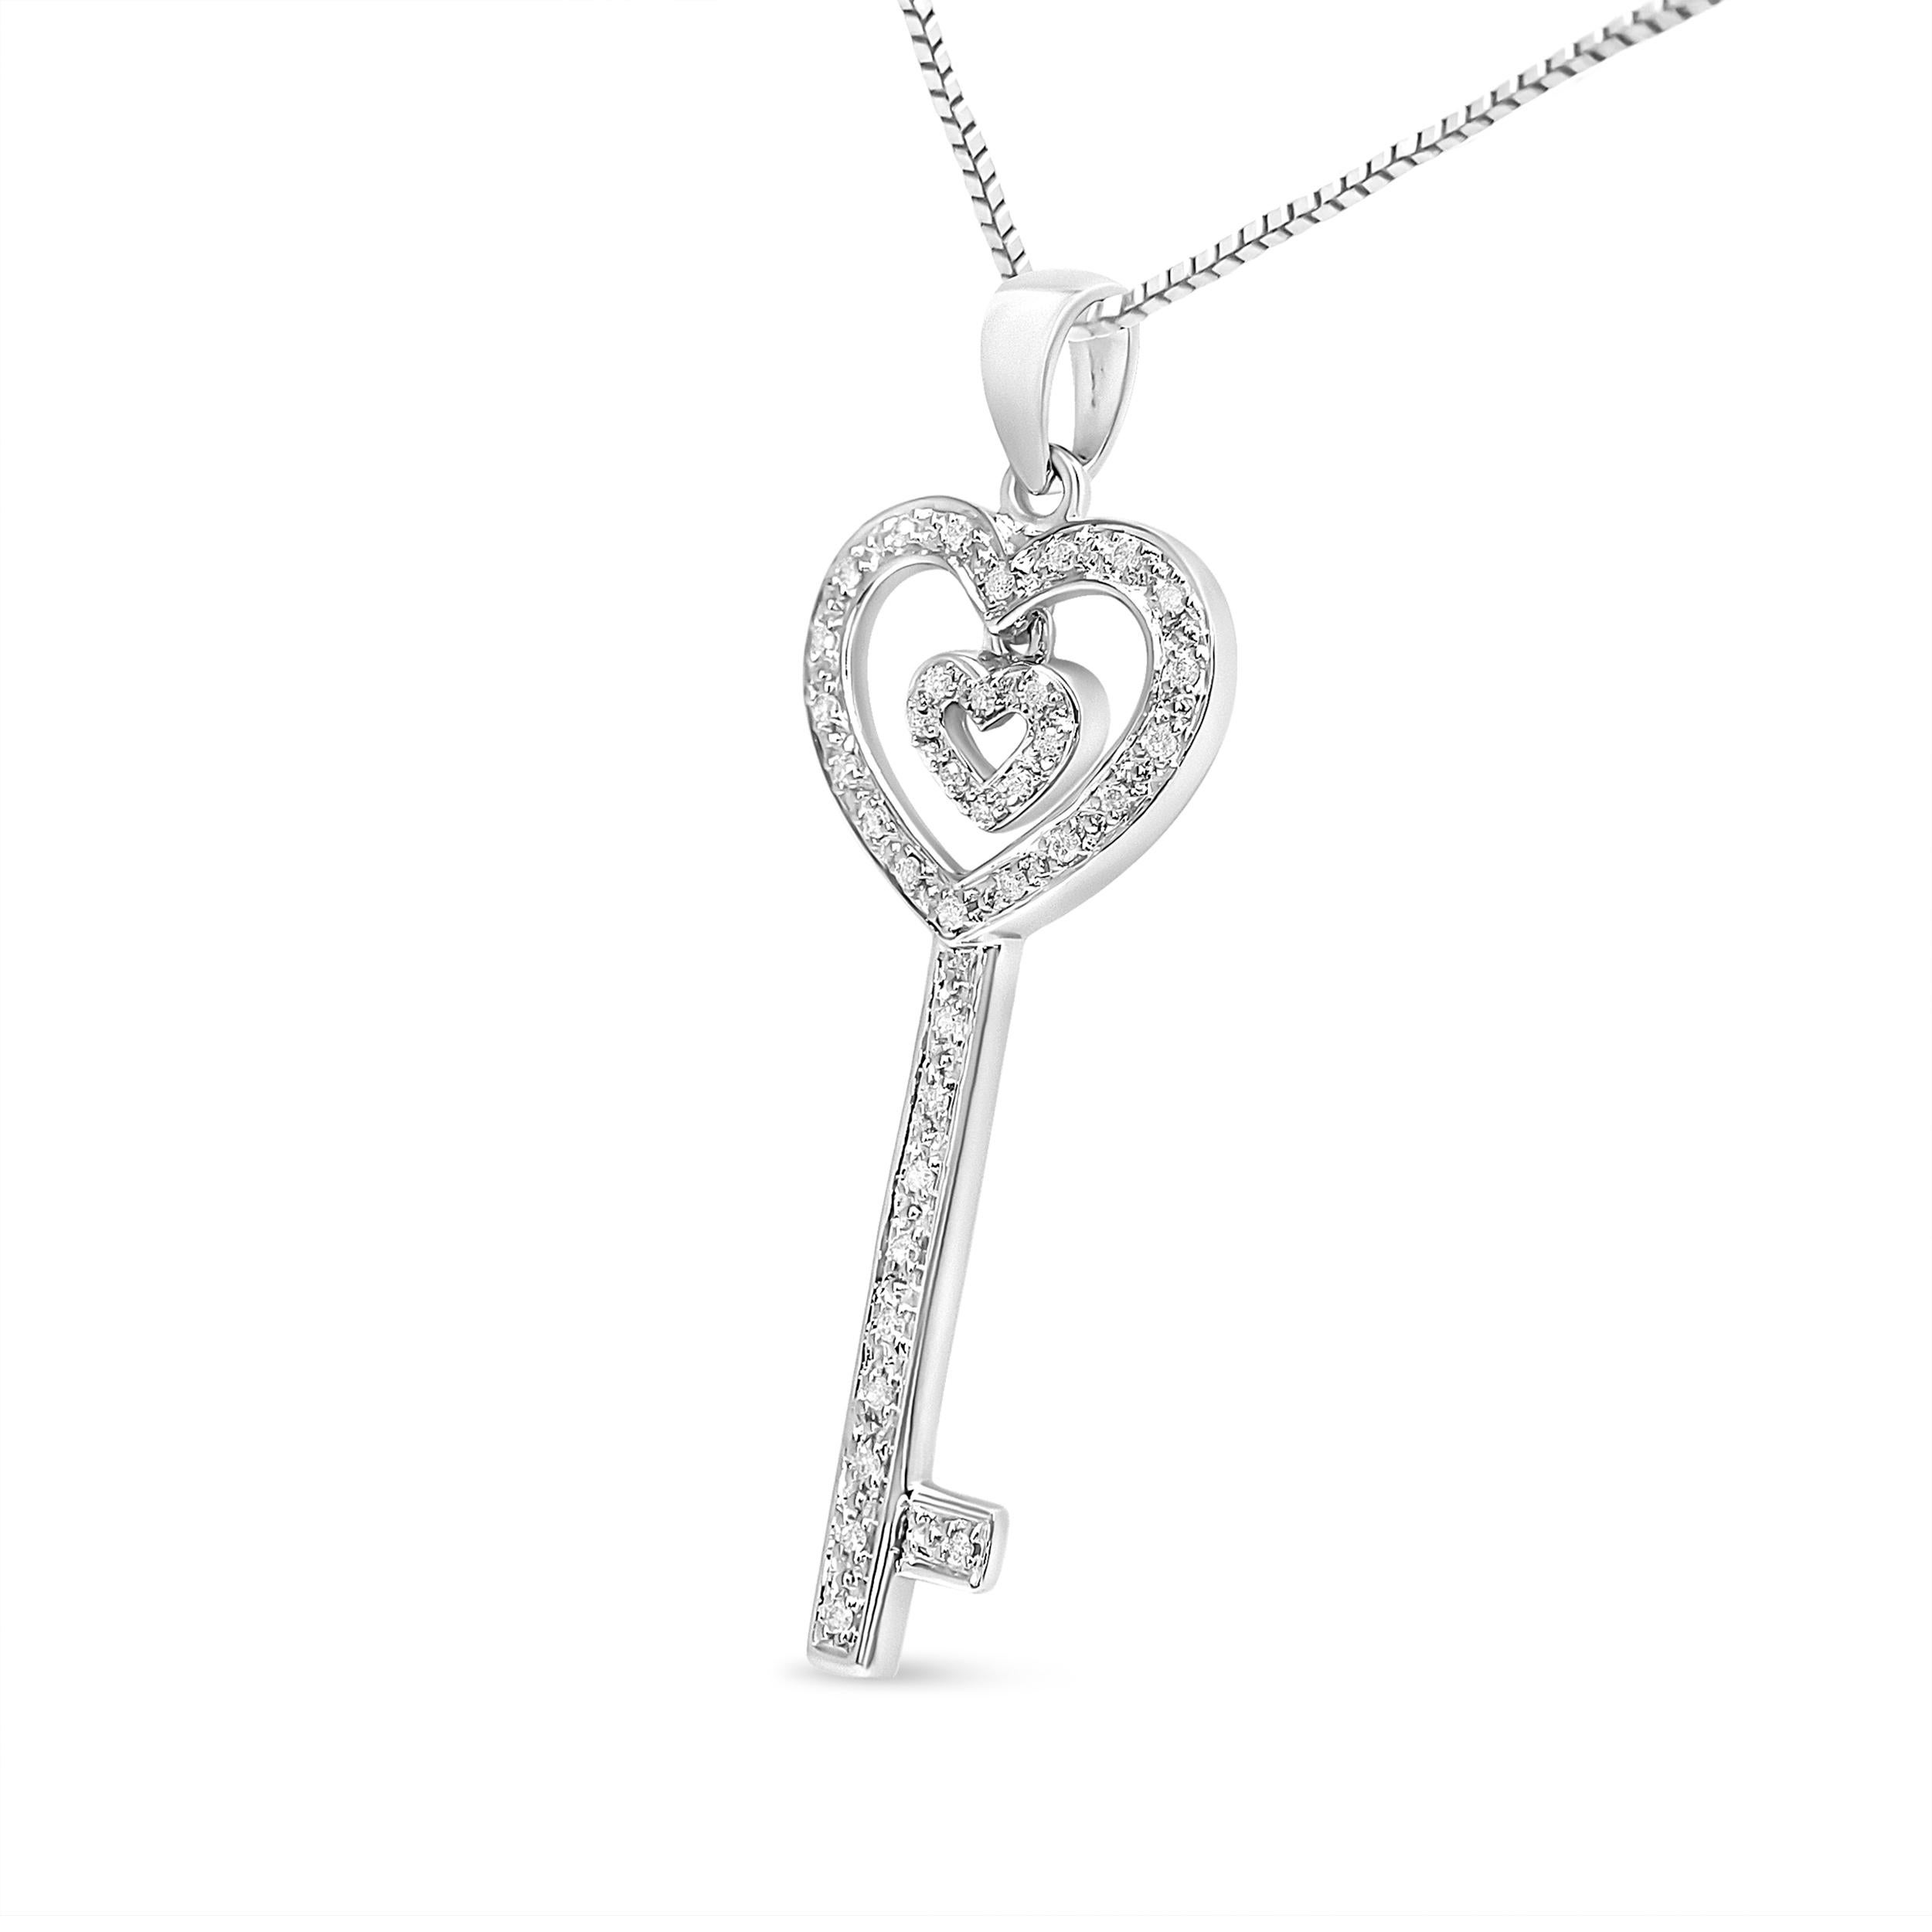 Wear love on your neck by adorning this beautiful diamond double heart & key pendant! This necklace is crafted in genuine .925 sterling silver and is embellished with a total diamond carat weight of 1/5 c.t. The double heart and key motif is set